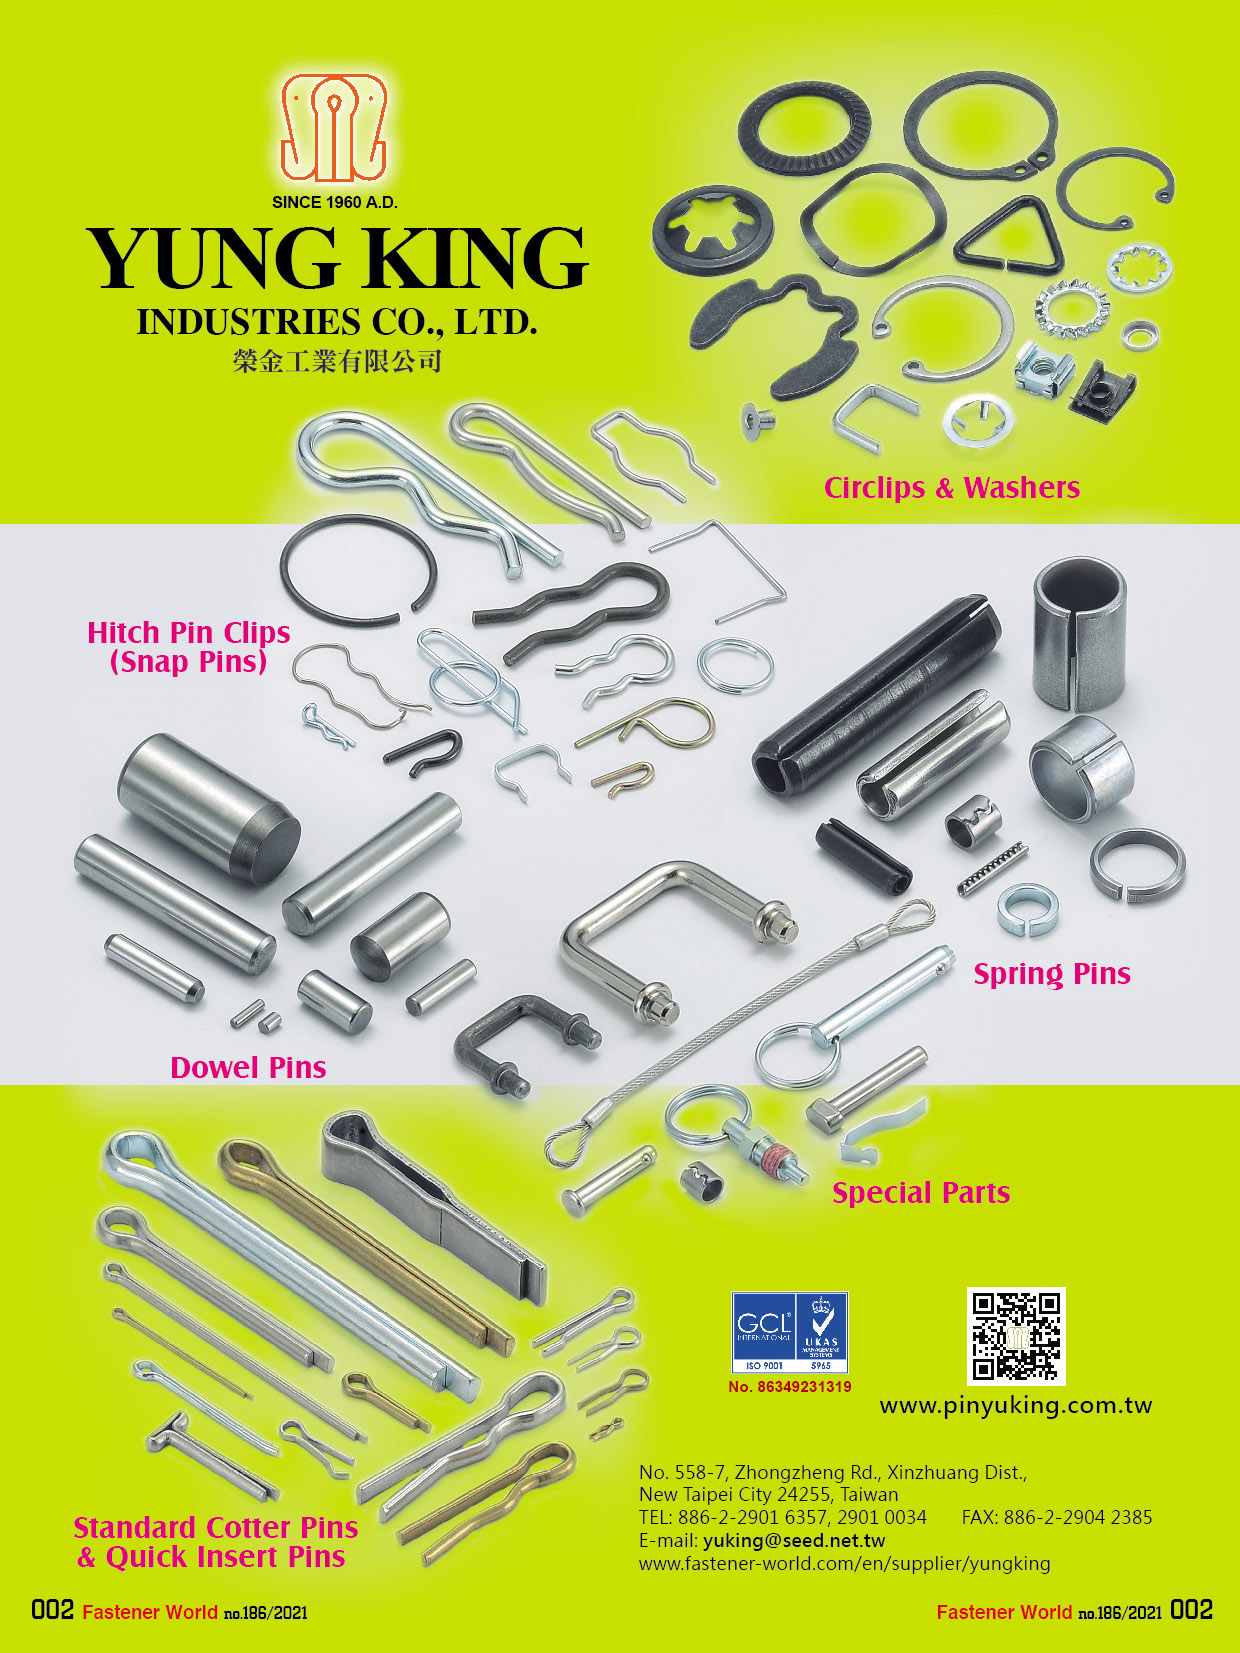 YUNG KING INDUSTRIES CO., LTD.  , Circlips & Washers, Hitch Pin Clips, Snap Pins, Dowel Pins, Spring Pins, Special Parts, Standard Cotter Pins & Quick Insert Pins